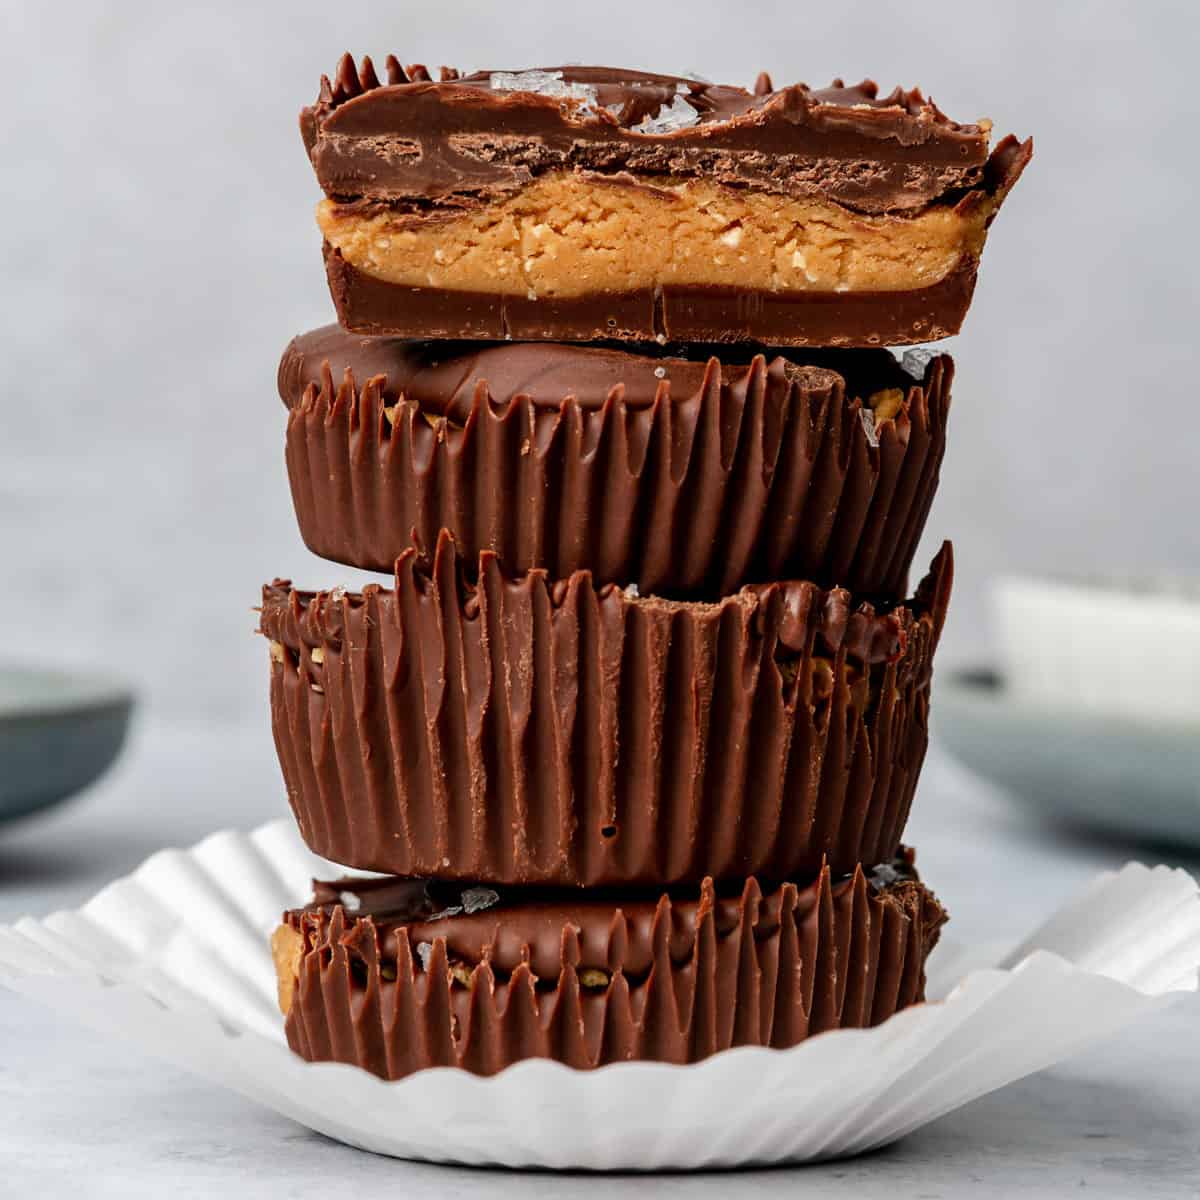 Homemade peanut butter cups stacked in a paper liner.